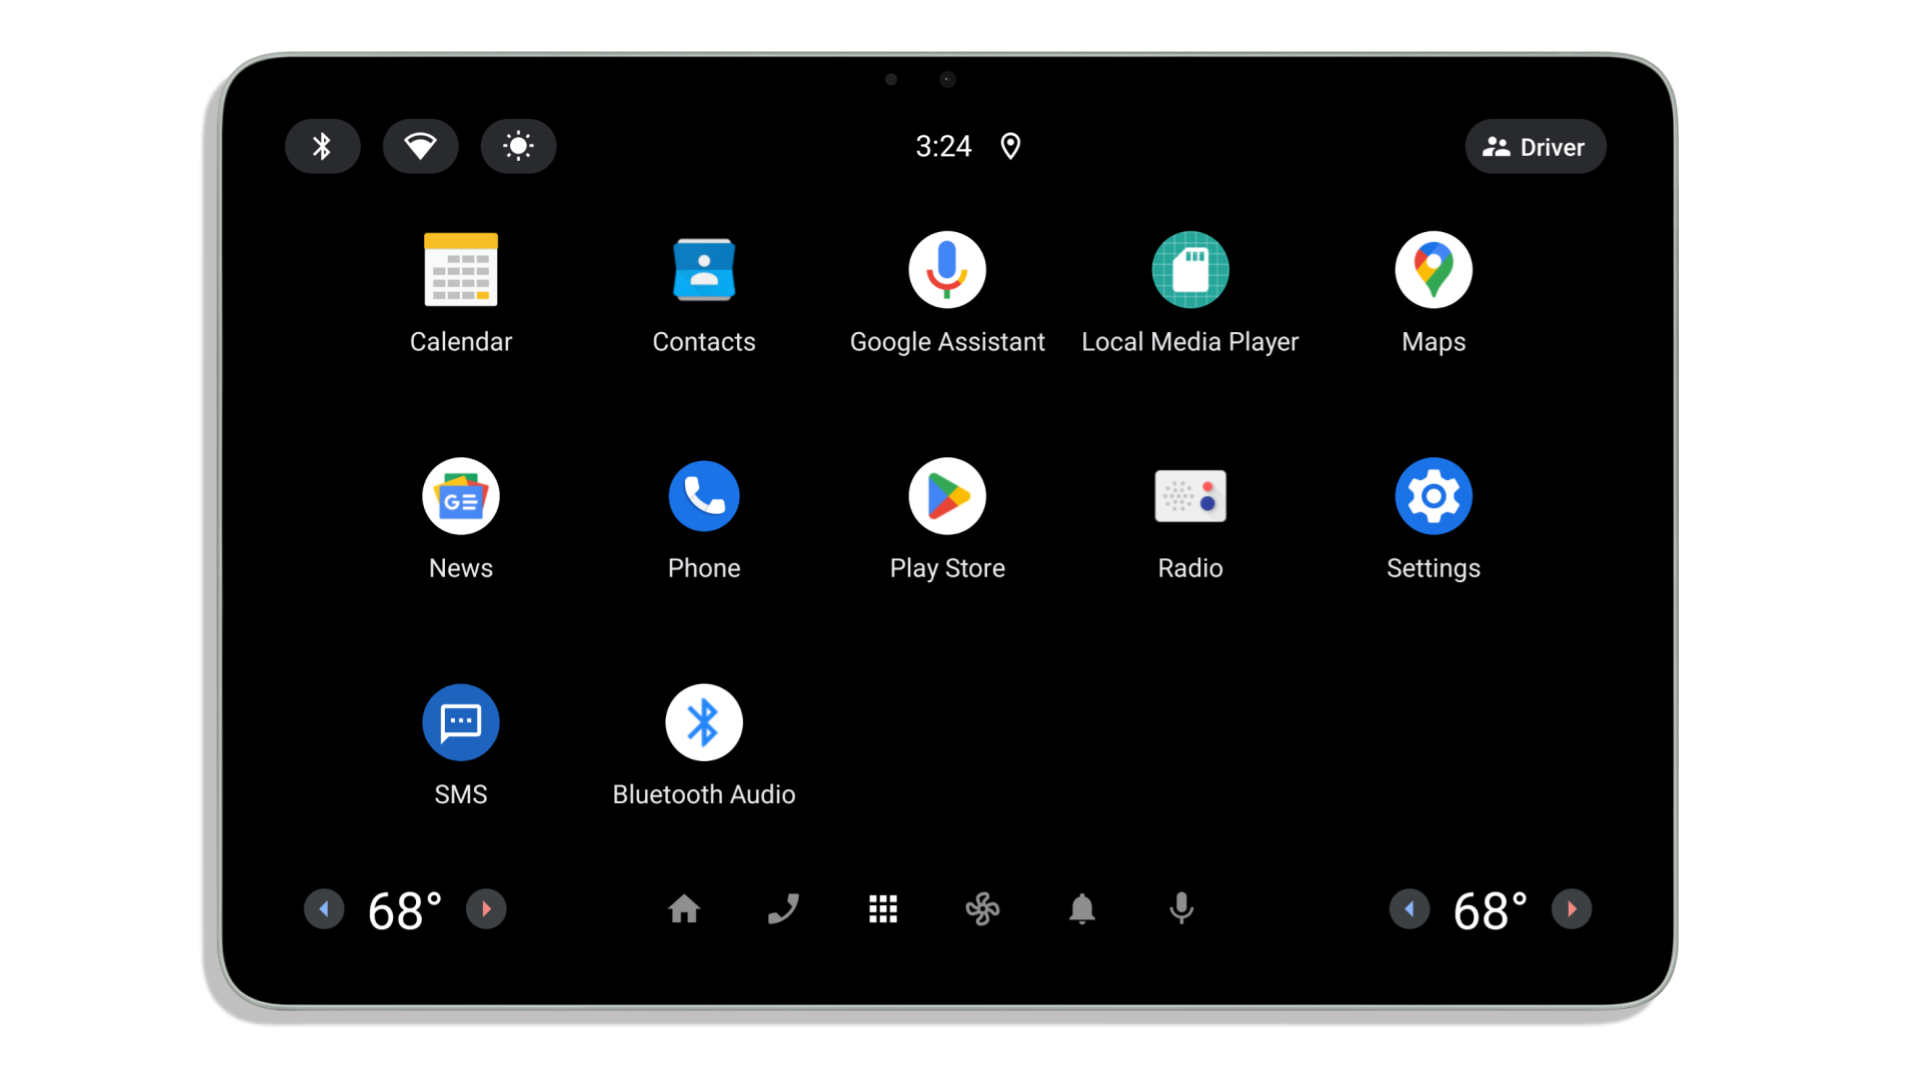 Android Automotive OS running on Pixel Tablet